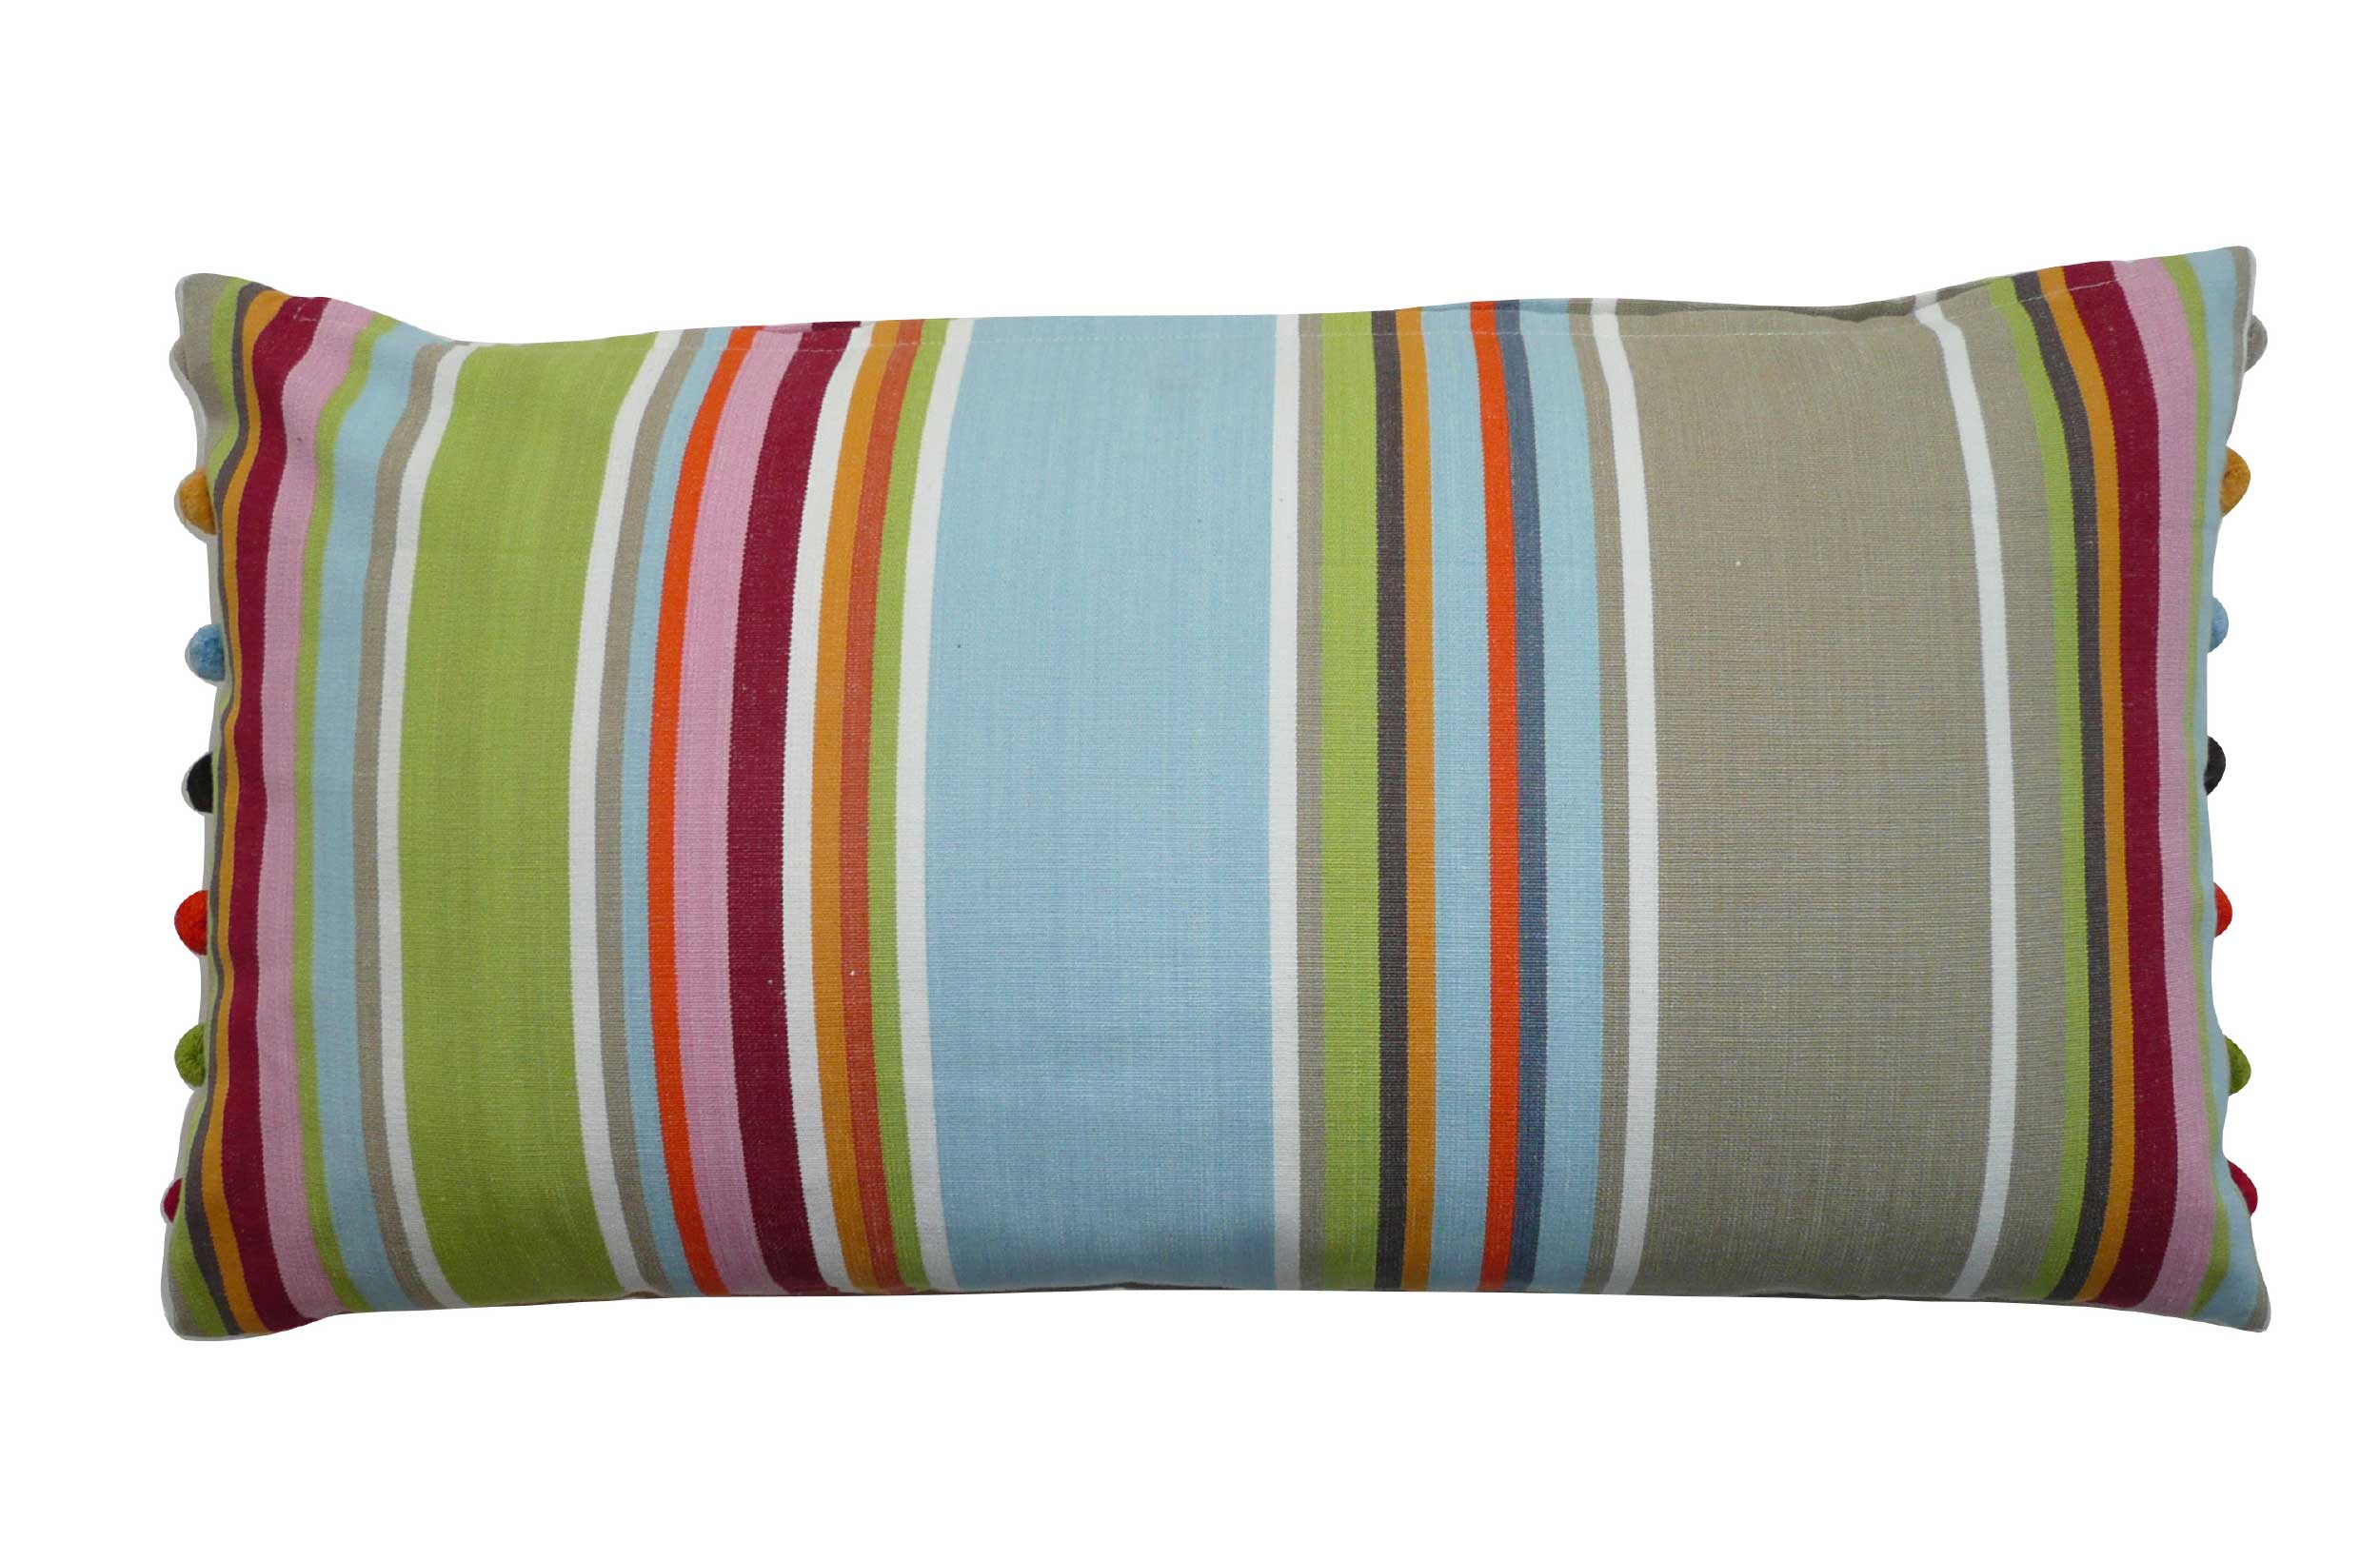 Striped Oblong Cushions with bobble fringe  grey, blue, light green   